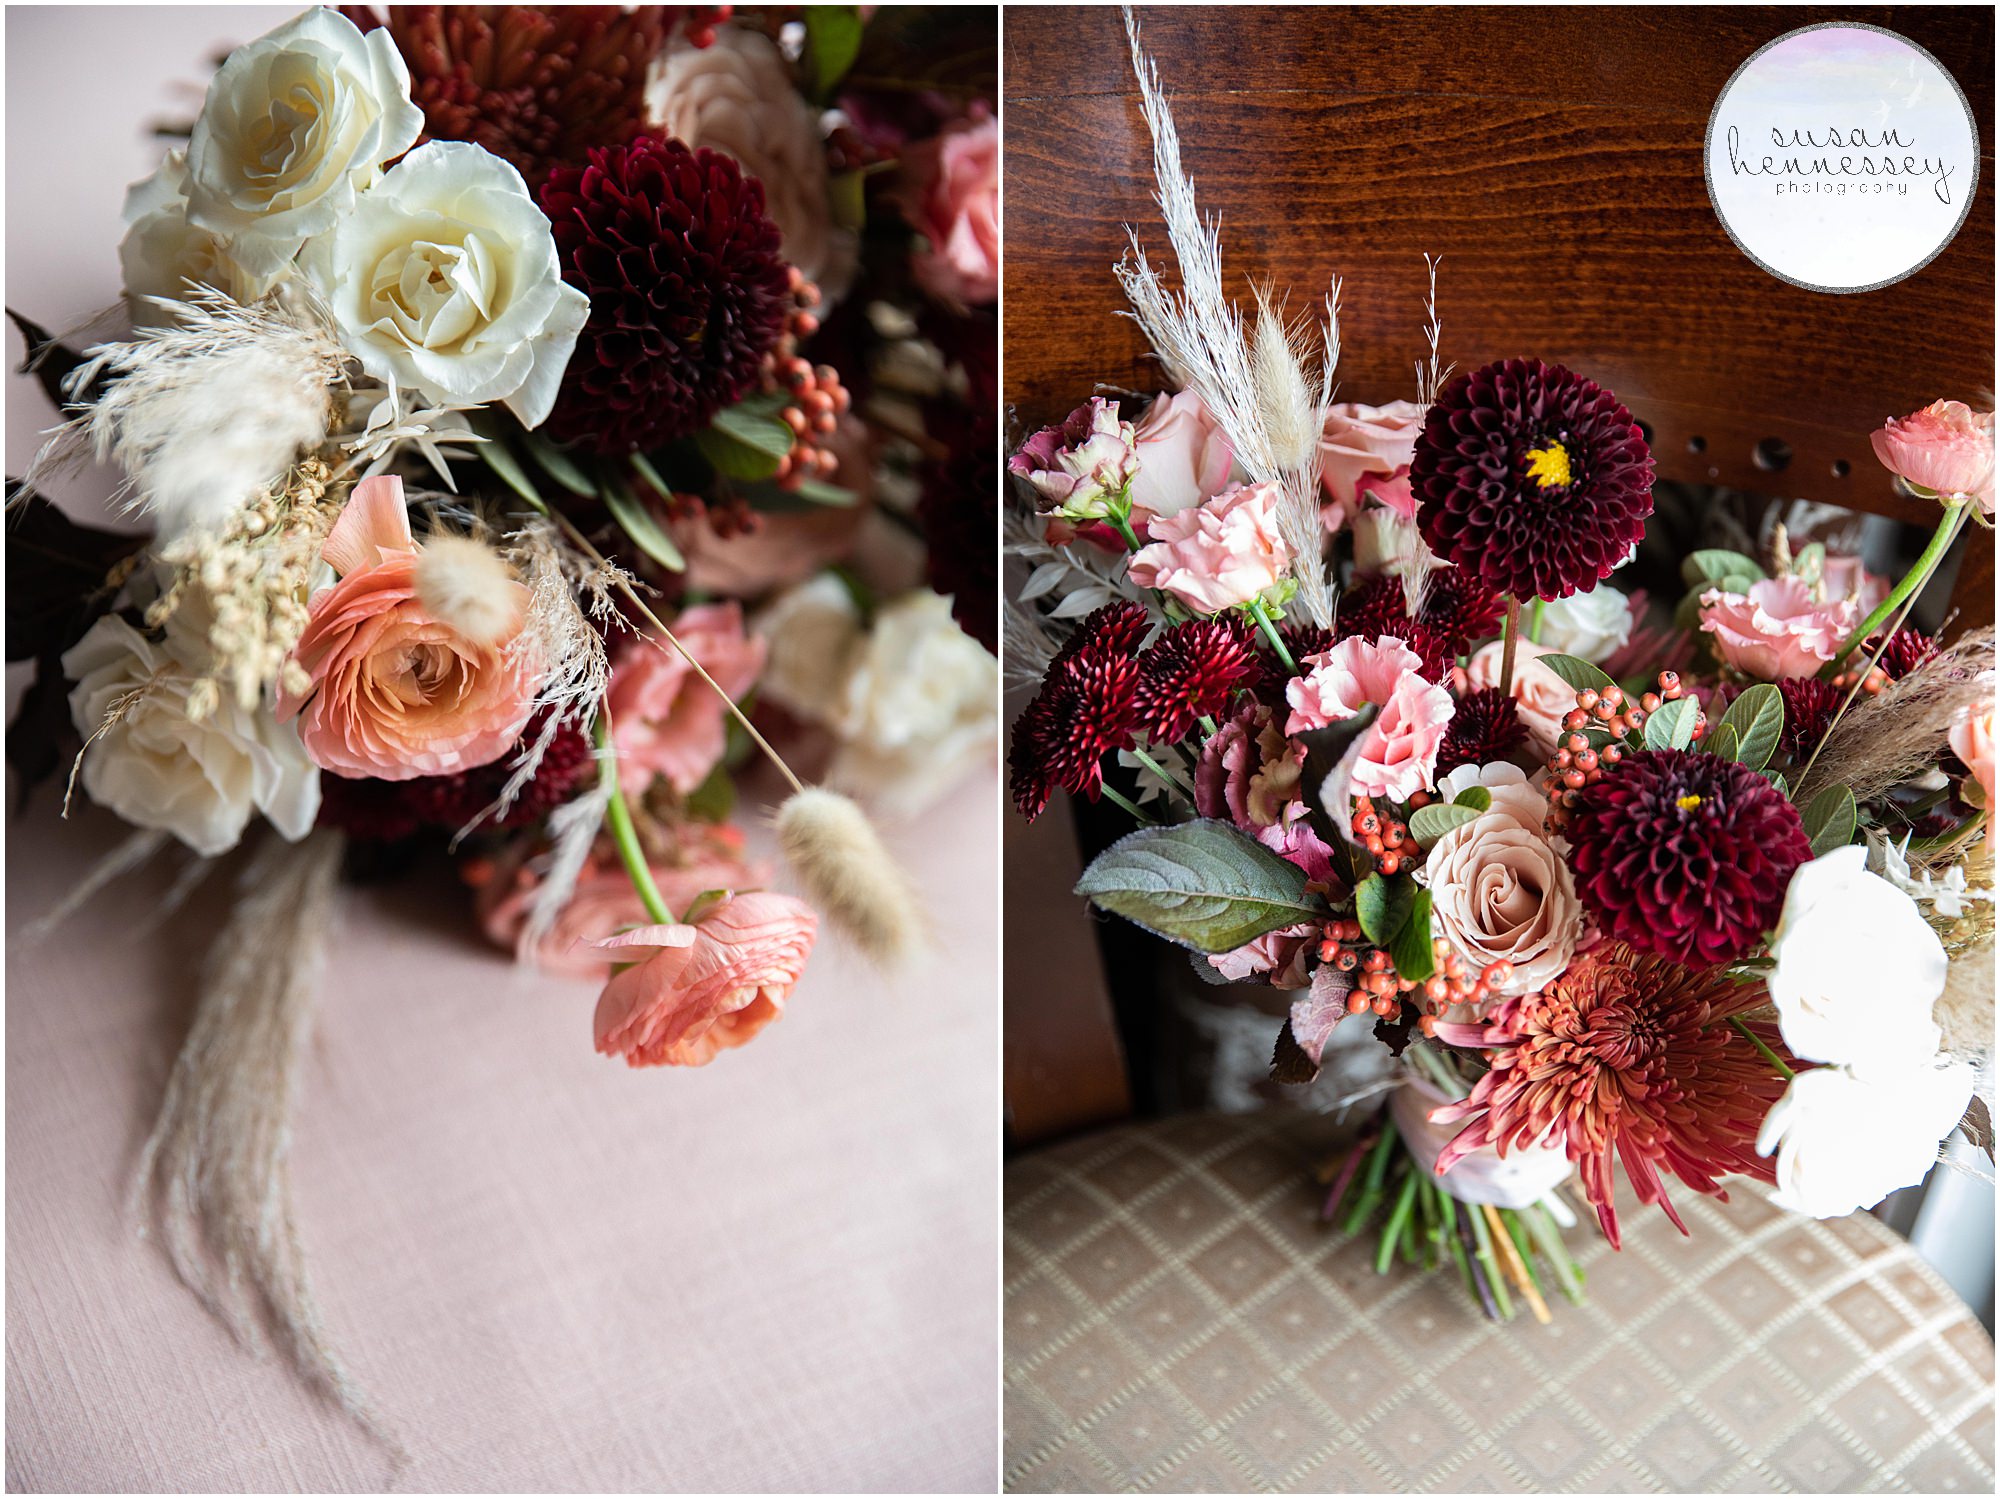 Autumn bridal bouquet at Andre's Lakeside Dining Microwedding